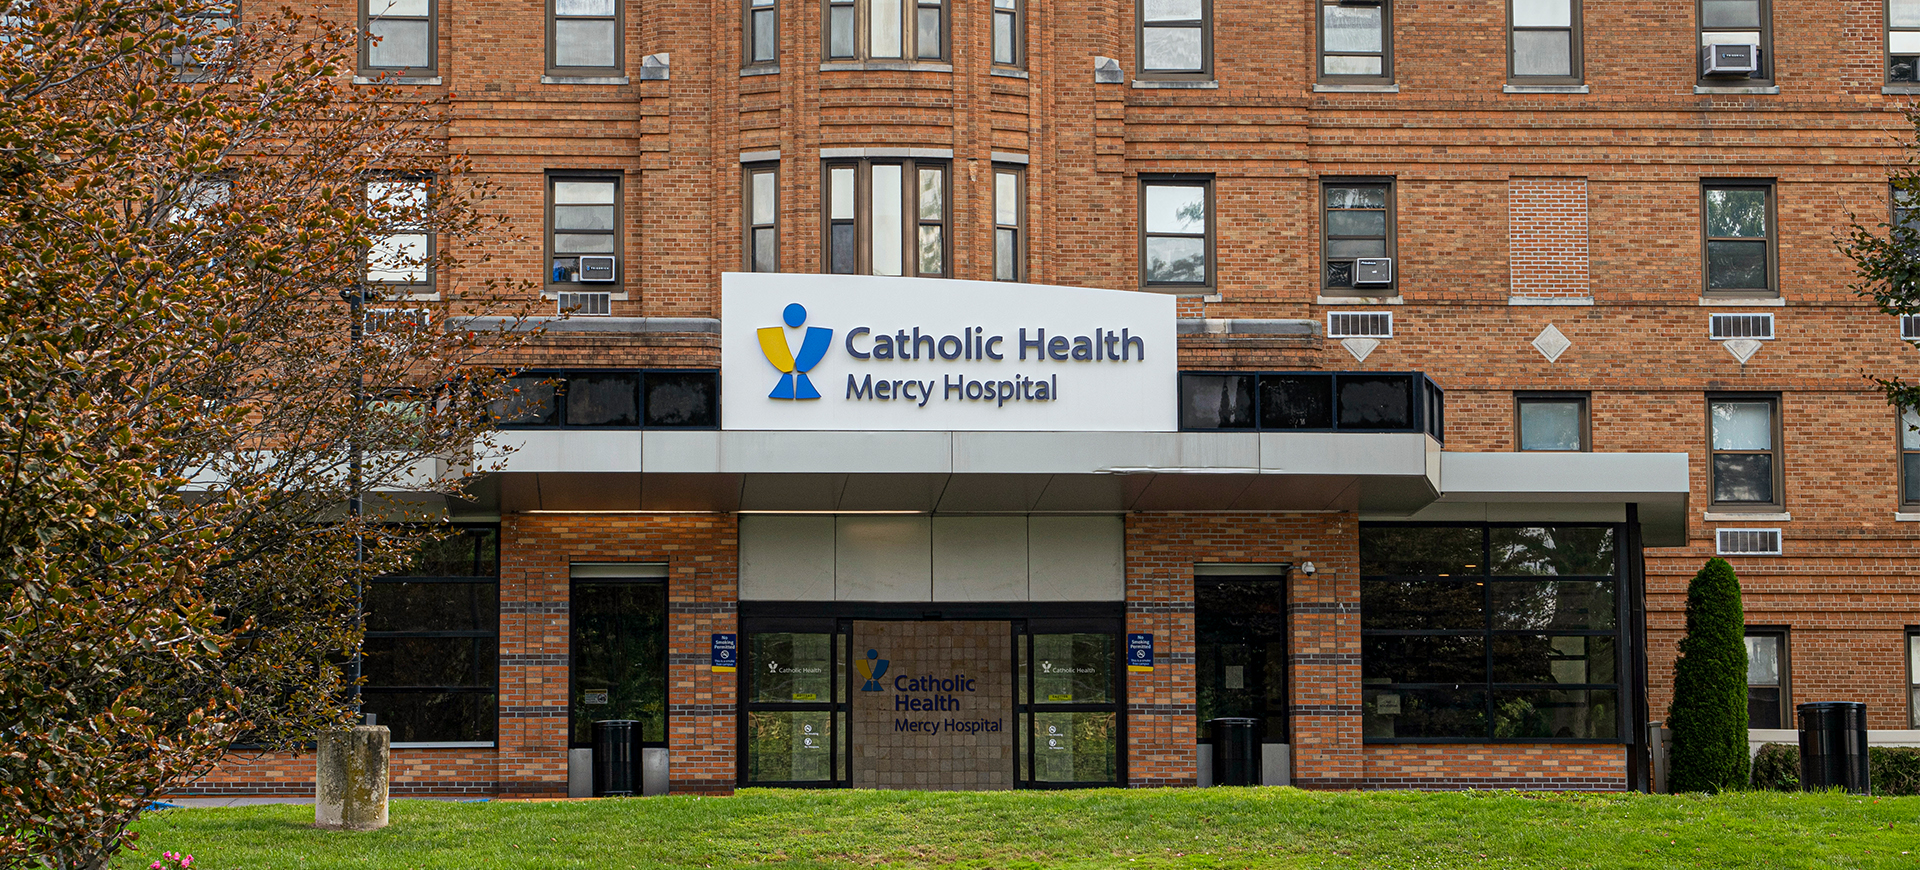       	        
	  	  The Cancer Institute at Mercy Hospital
	  	  
	        